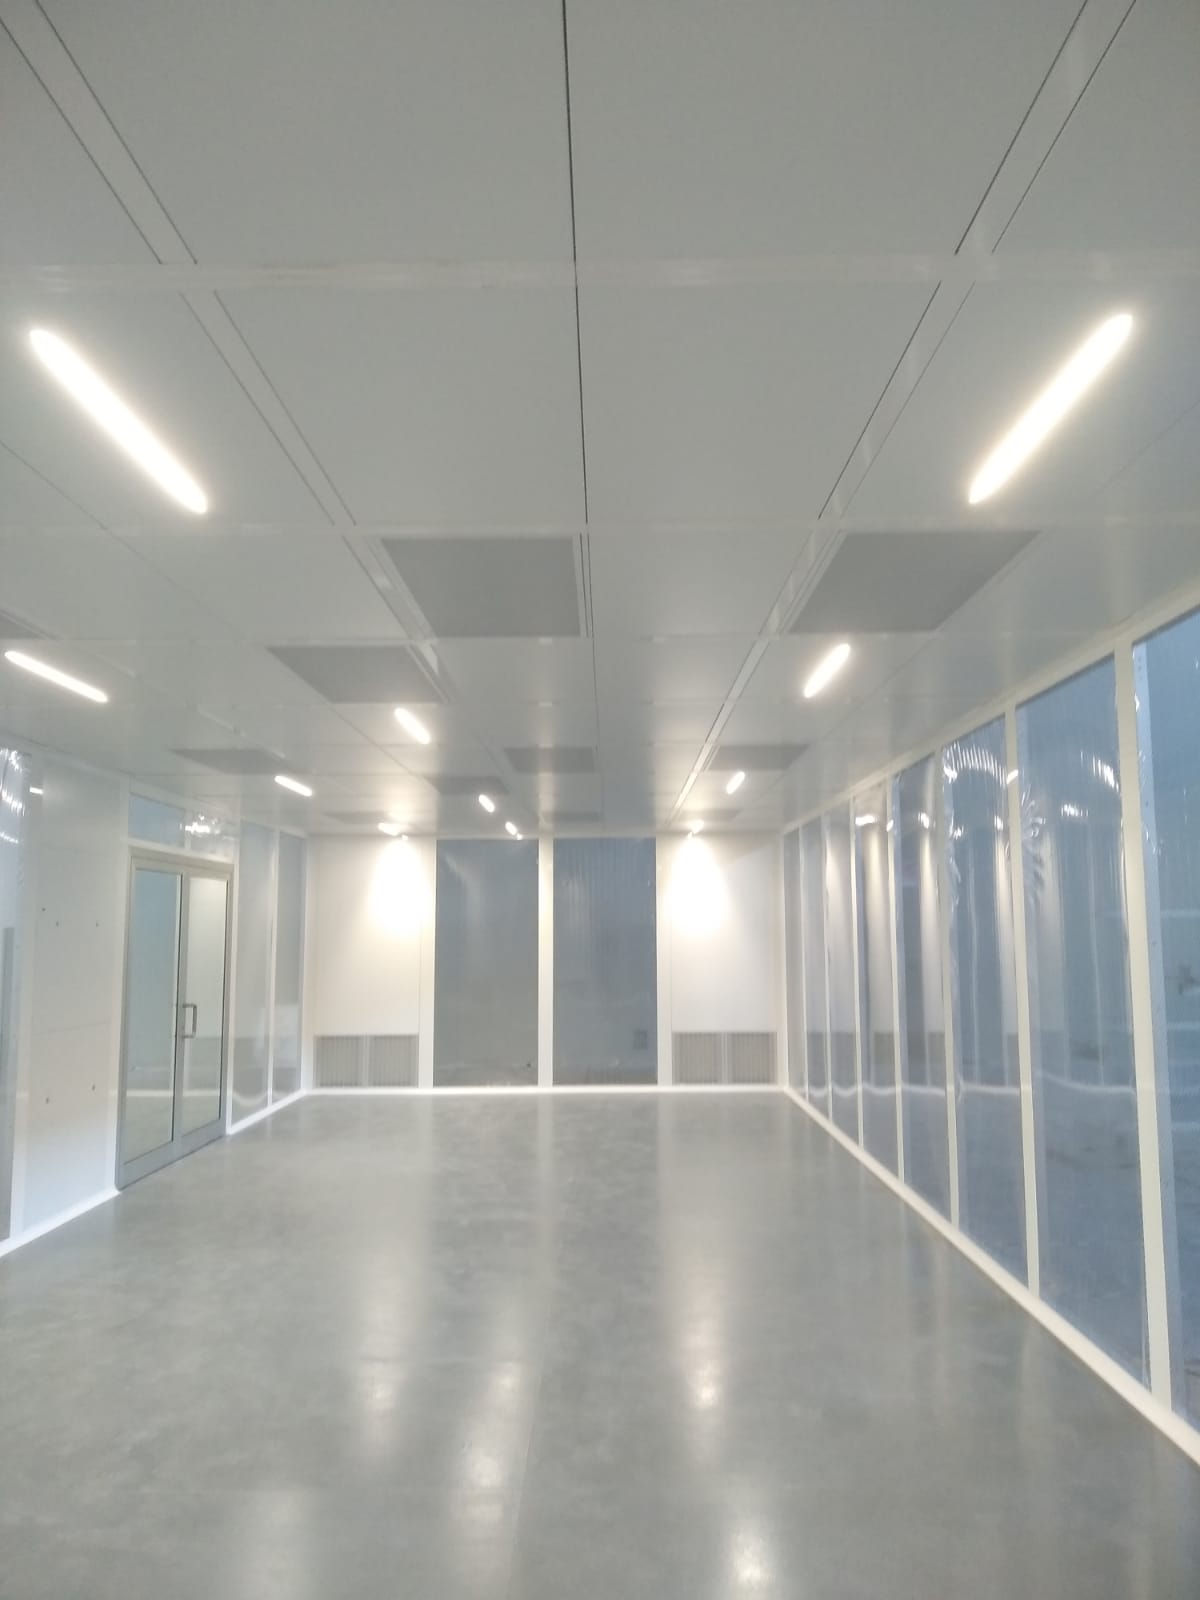 Consider these 3 factors when designing a future-proof cleanroom